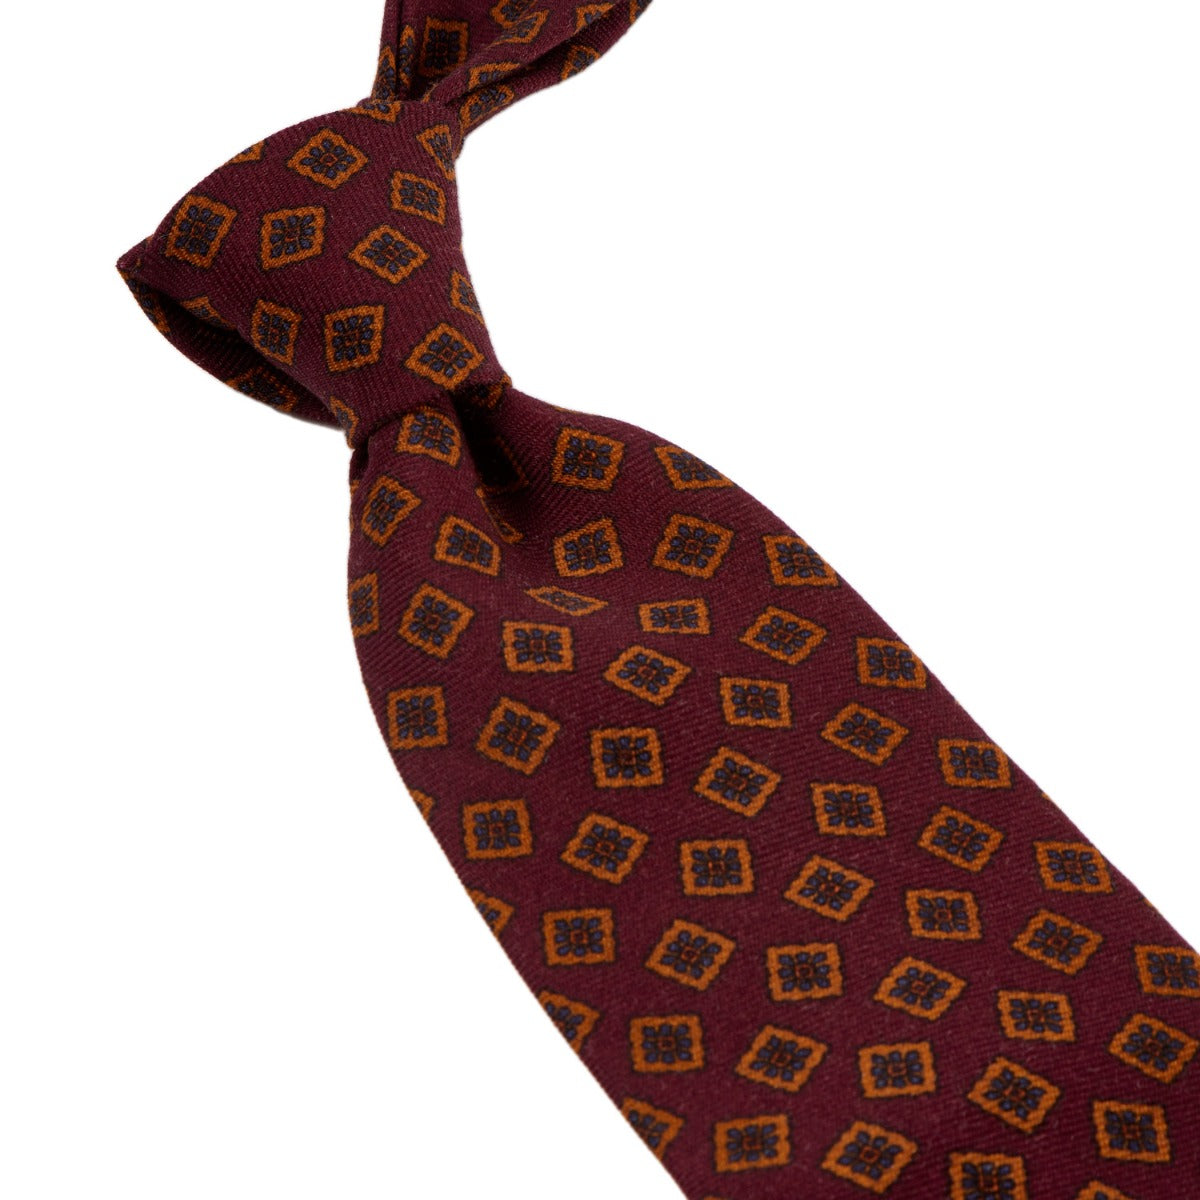 A Sovereign Grade Burgundy Tossed Square Wool Challis Tie with highest quality brown and orange designs, handmade in the United Kingdom from KirbyAllison.com.